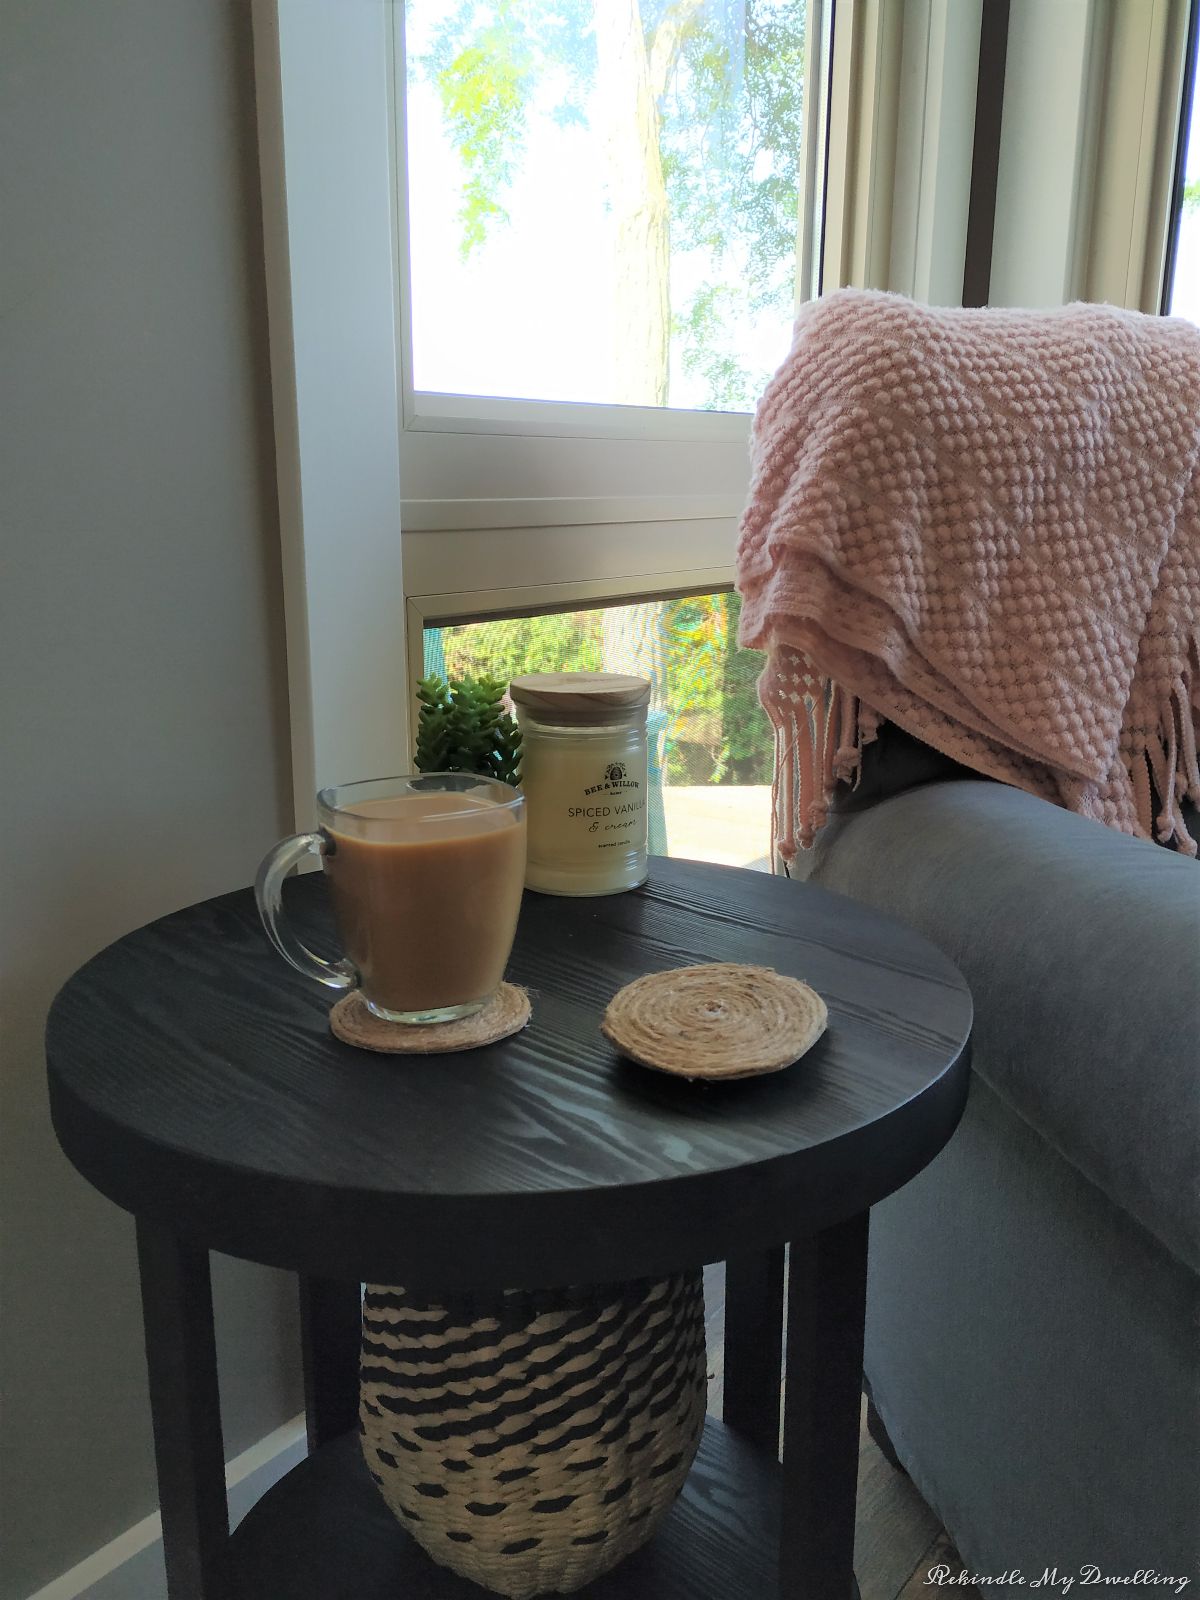 Rope coasters, coffee and decor next to a chair.